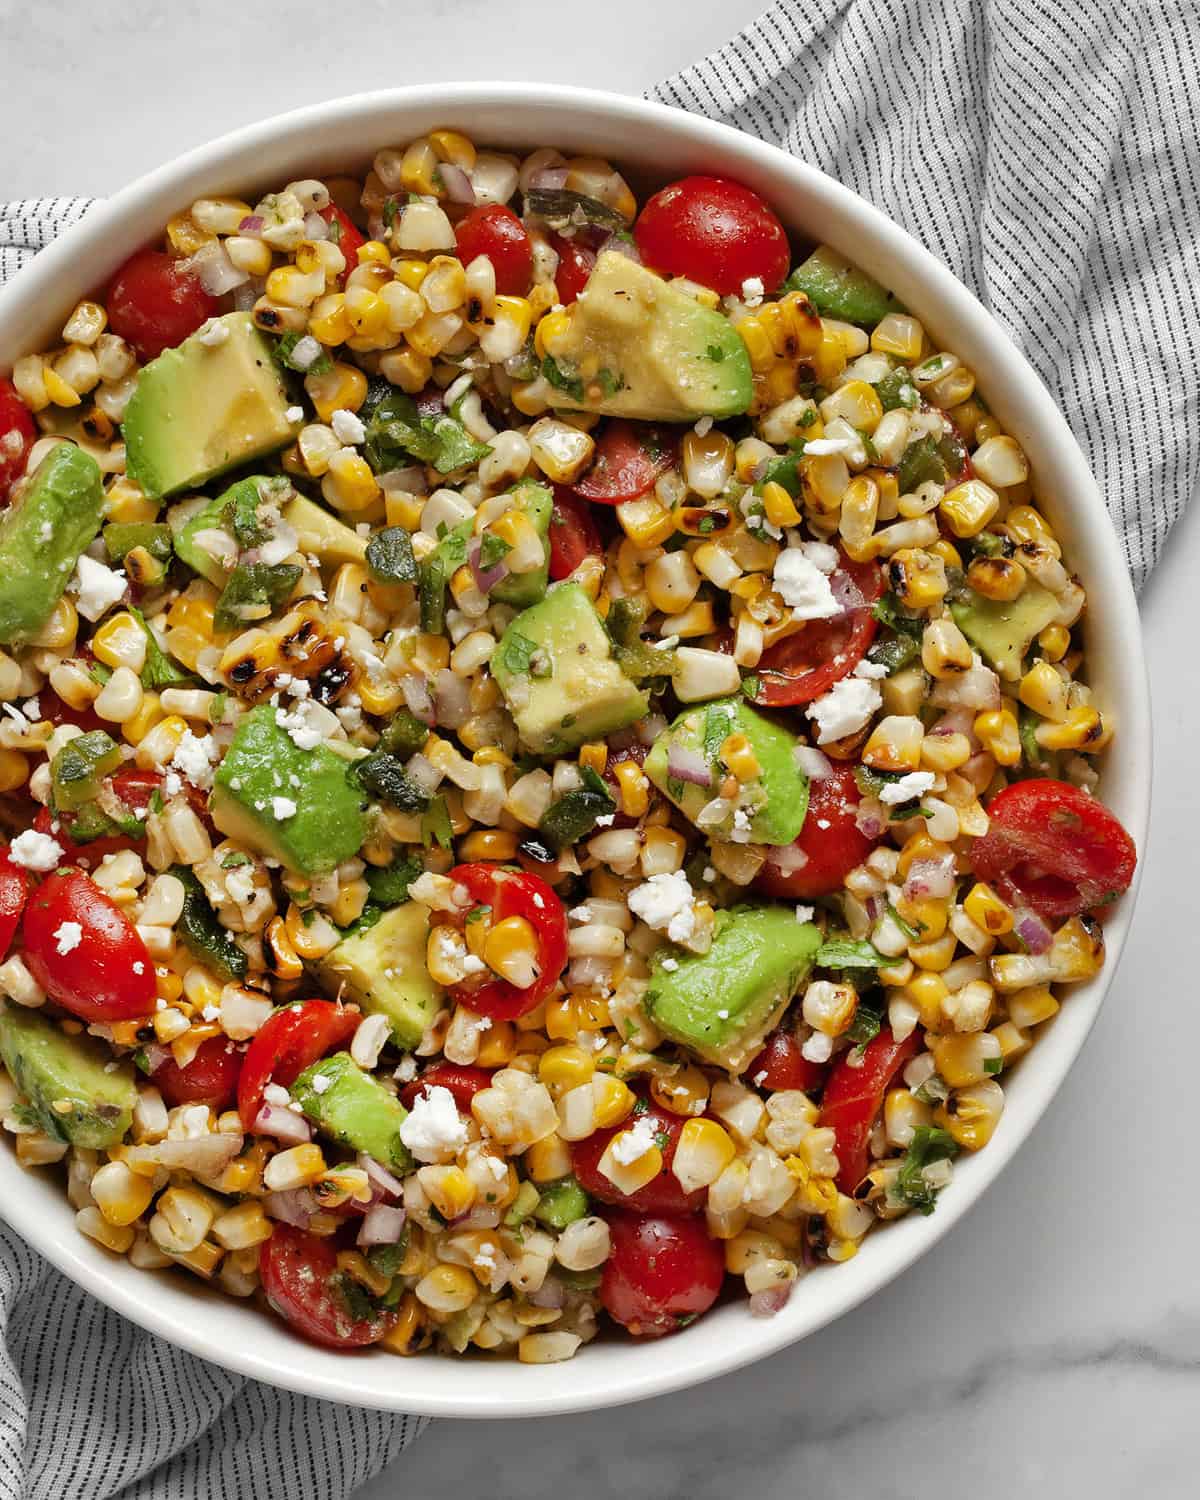 Corn salad with avocados in a bowl.